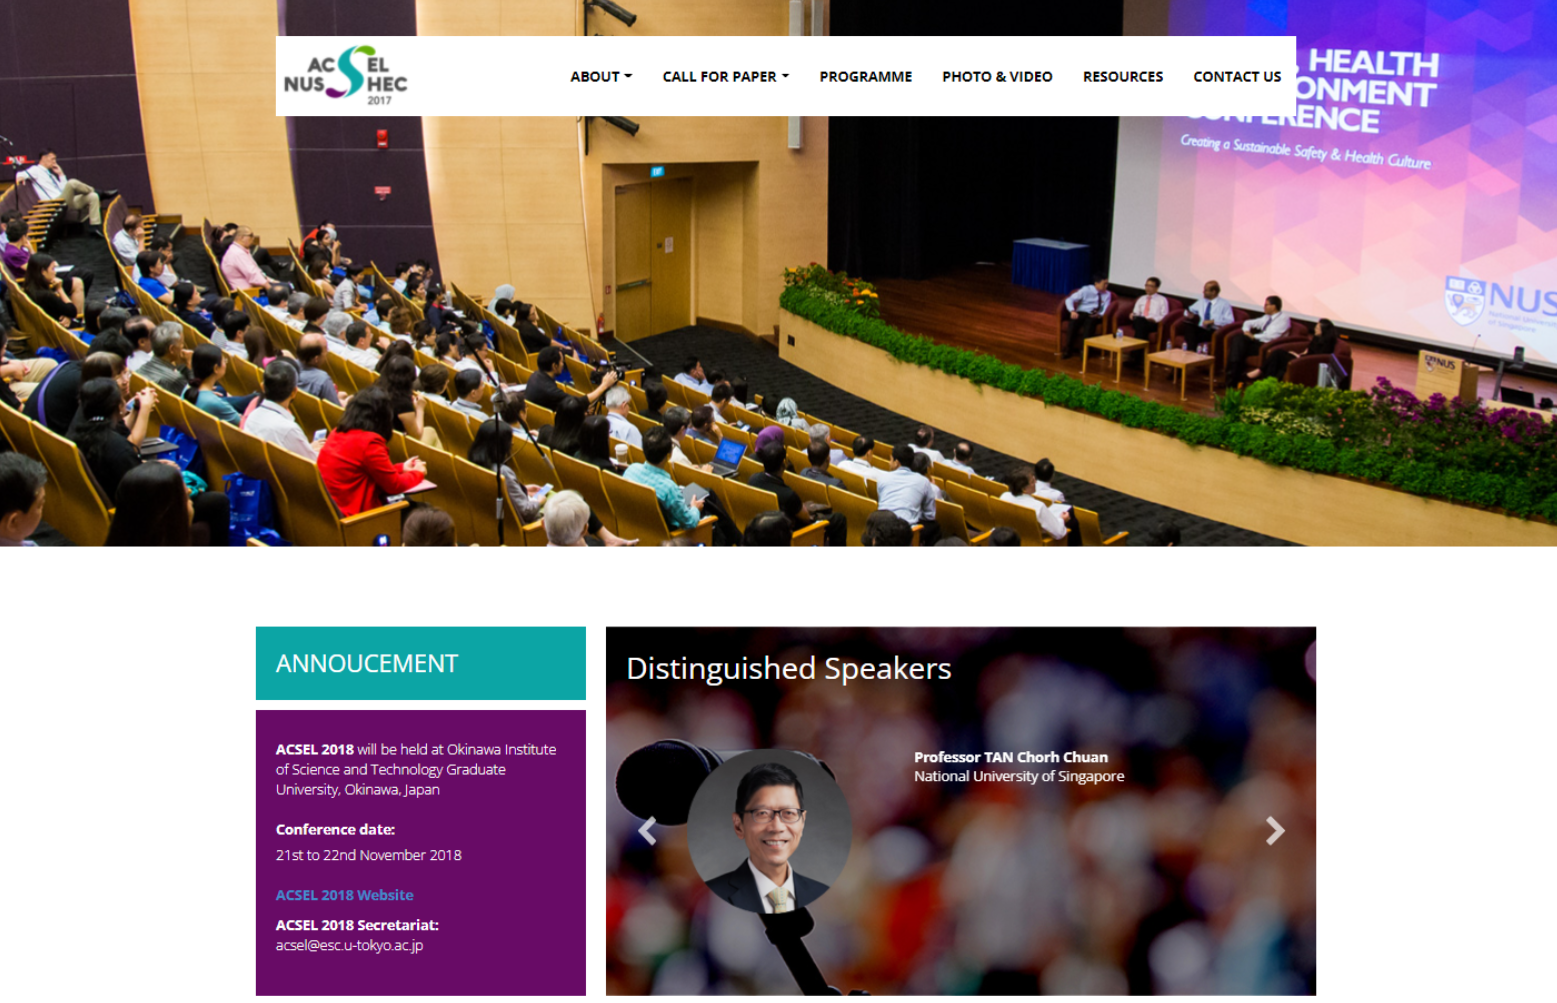 The NUS ACSEL conference website.